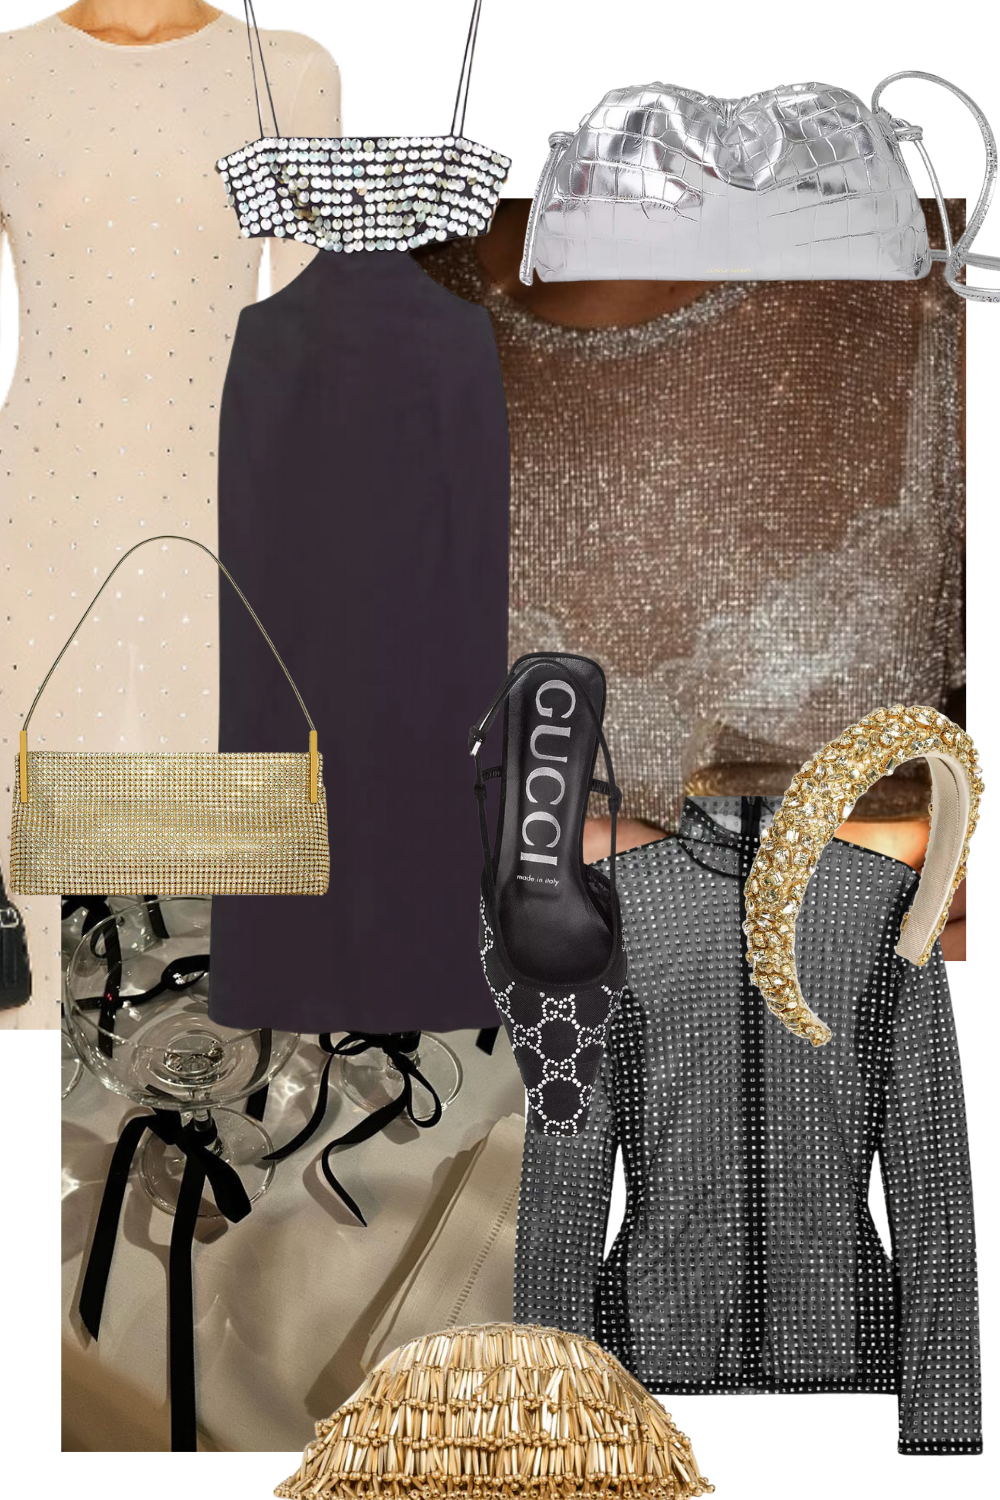 Collage of Mesh, Embellished and Sheer Fashion Items 